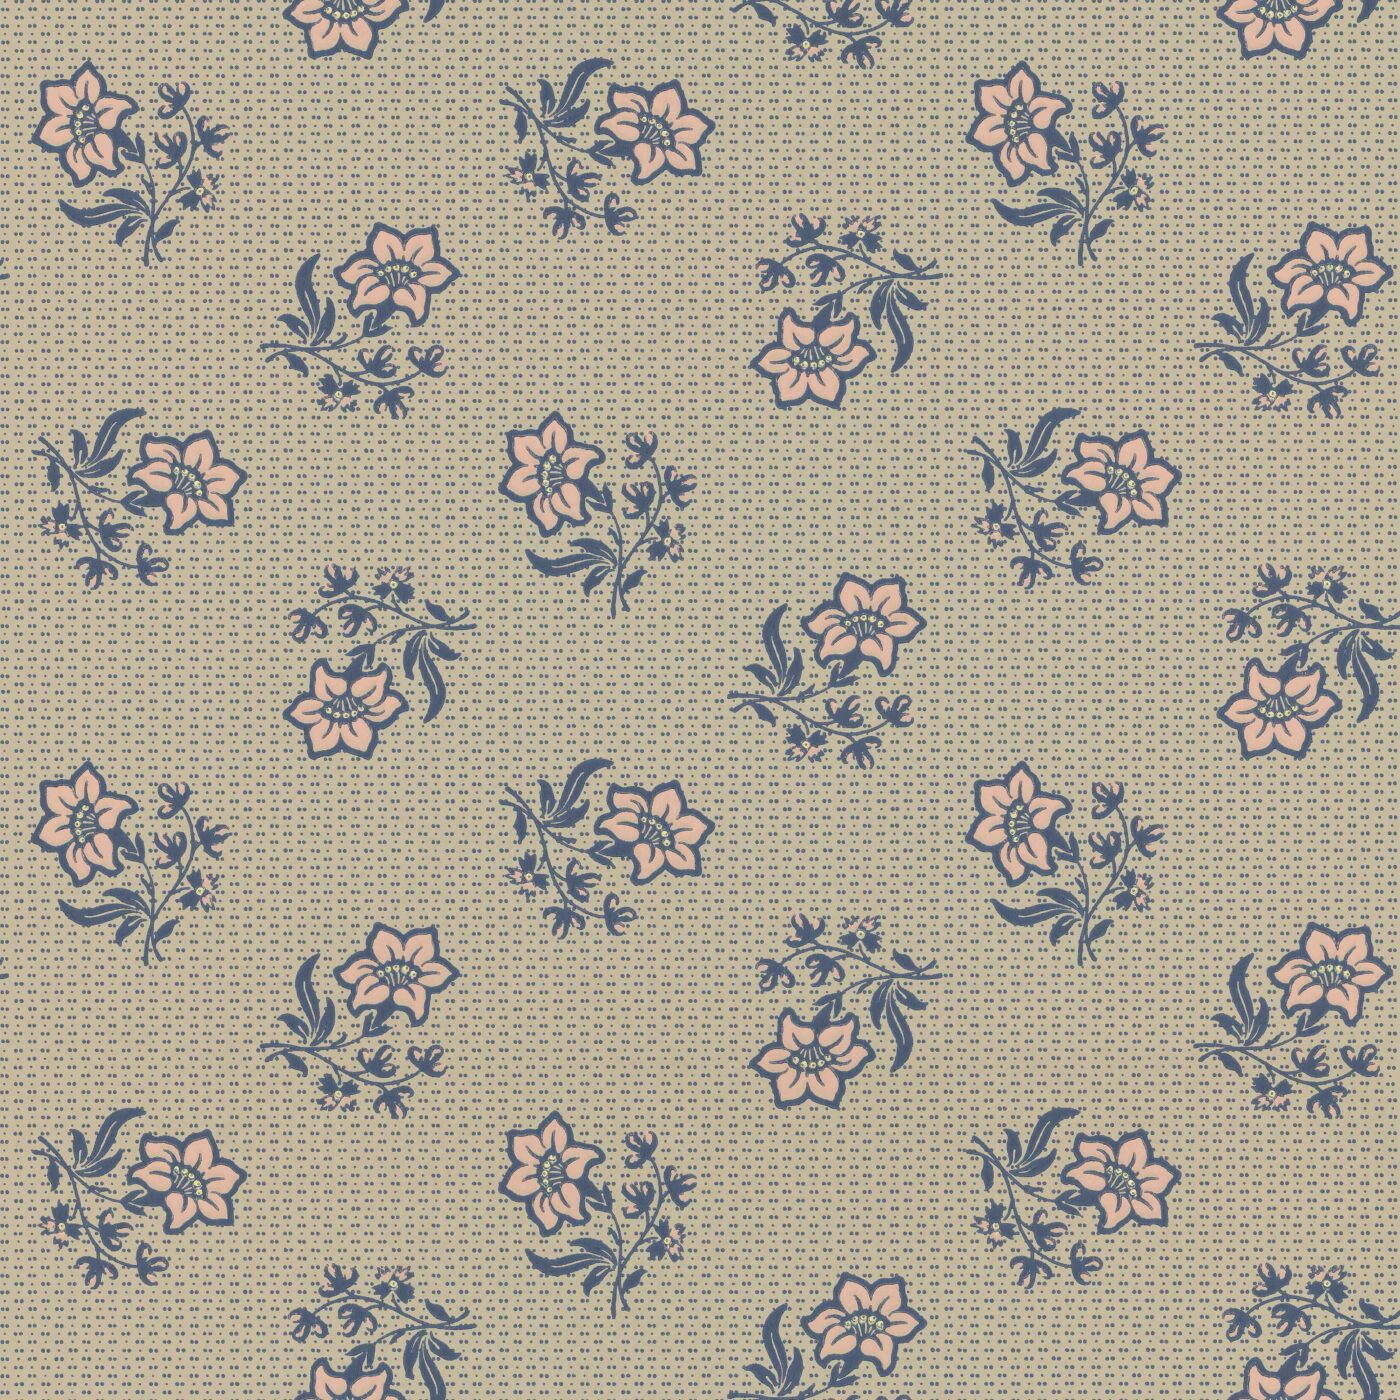 A beautifully stylistic floral wallpaper. Borrowed from an old Chinese woodblock printed textile, but with clear European influences.